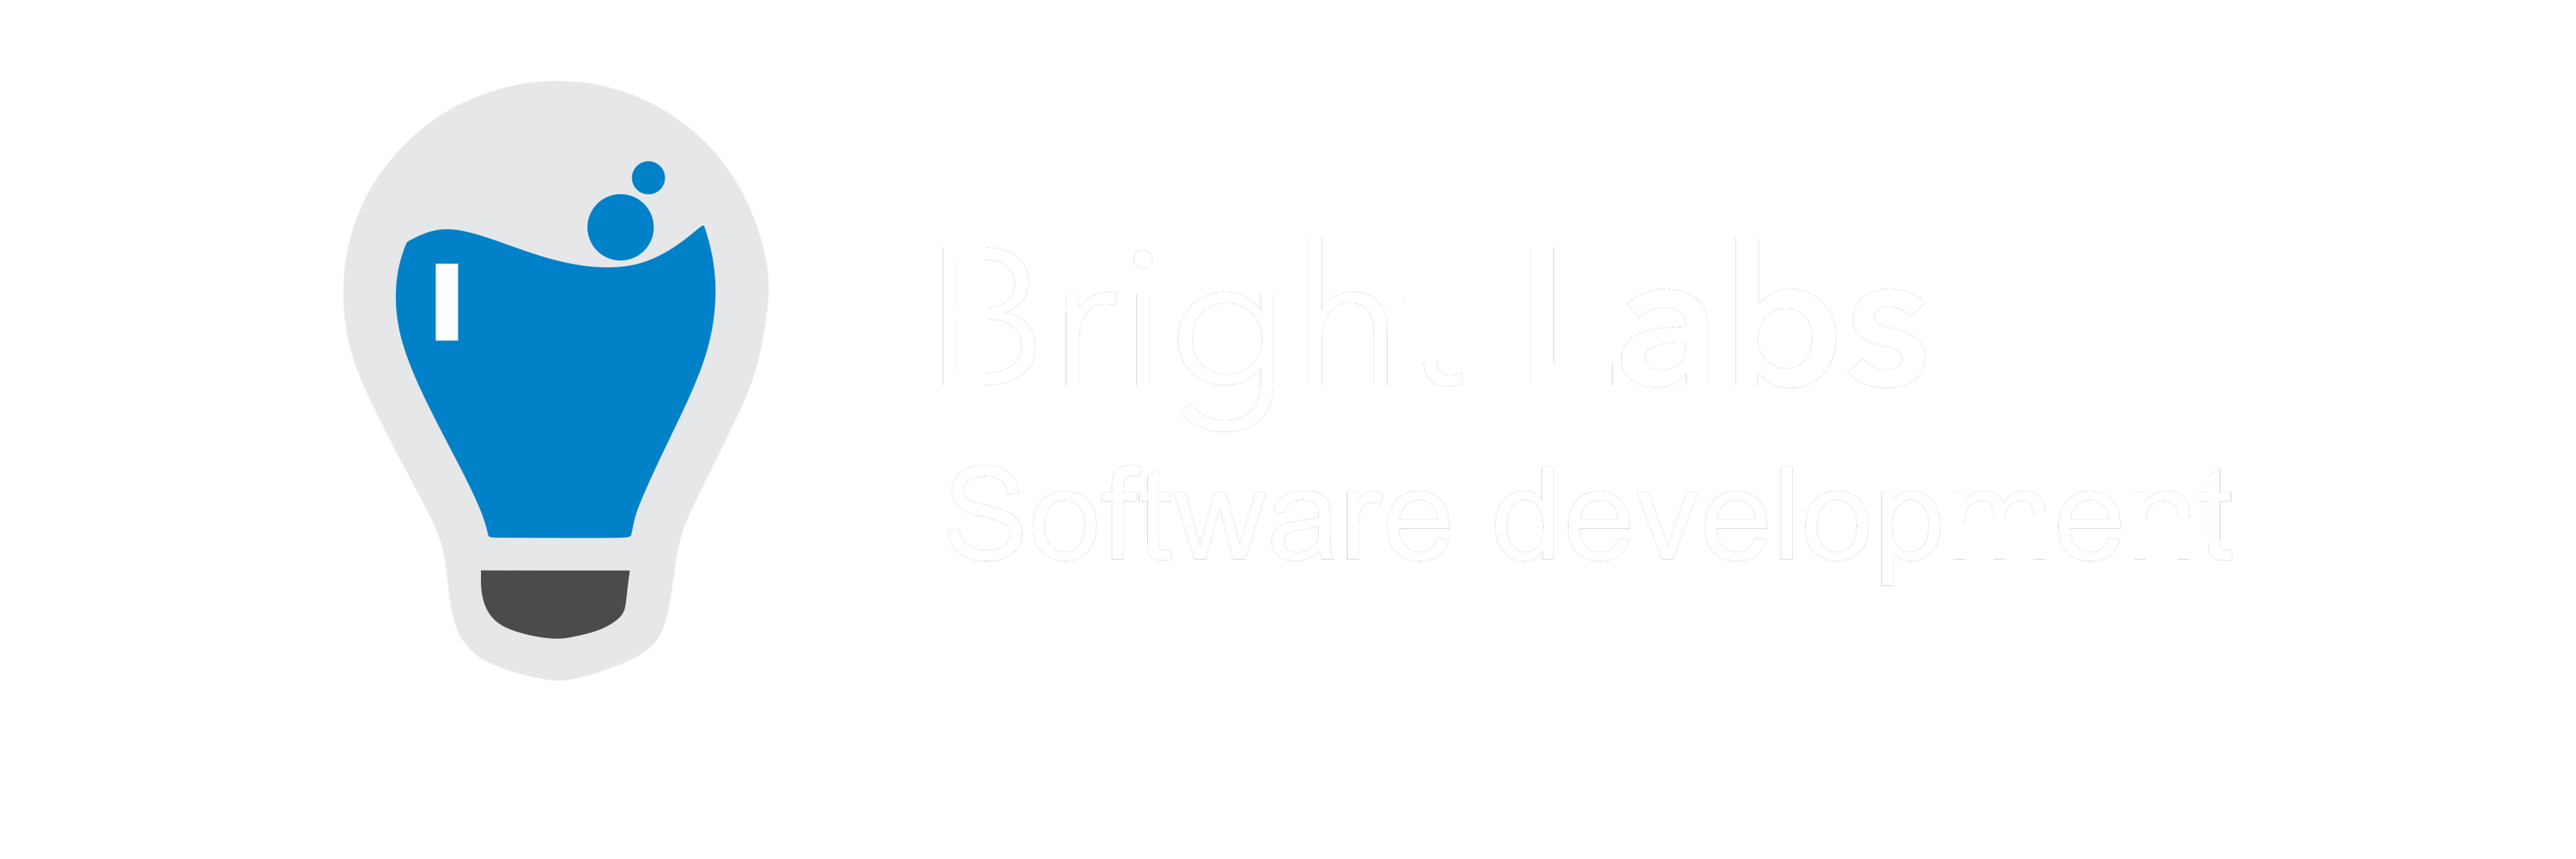 BrightLabs IT Services/Support